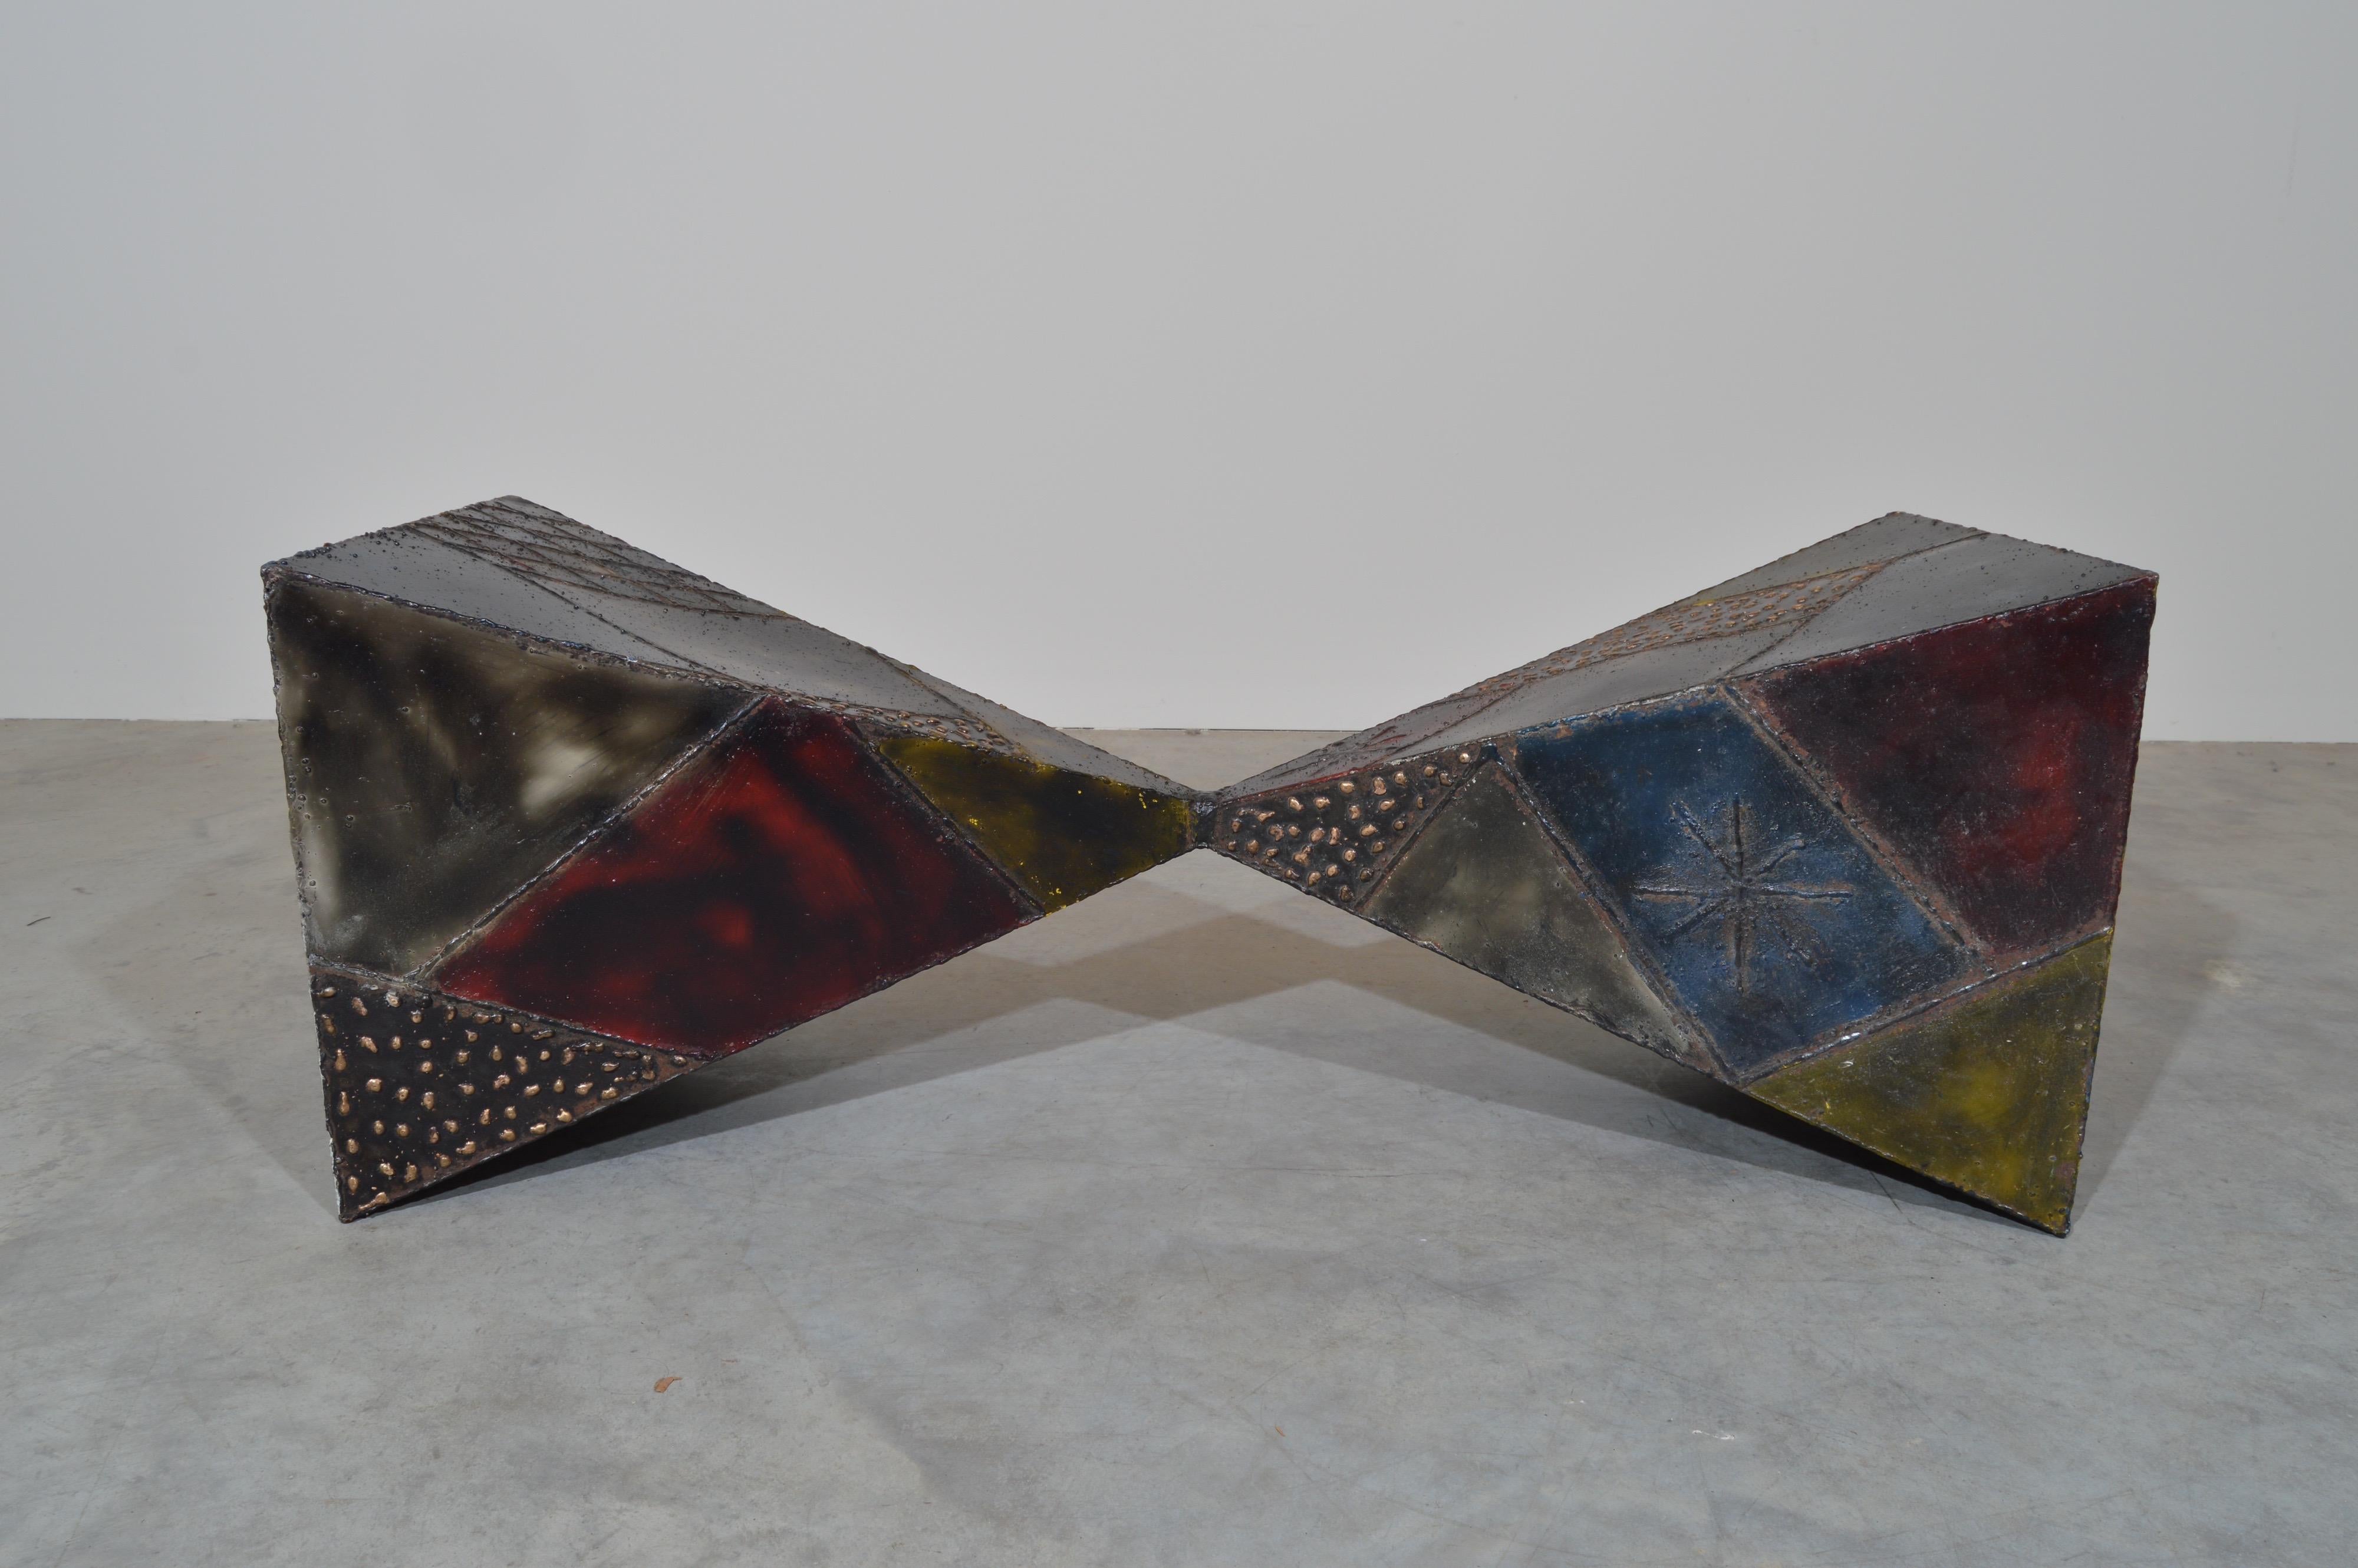 Paul Evans for Directional Brutalist welded steel coffee table base having abstract geometric pattern designs colored with acid pigments in red, blue and yellow. 
Signed PE72
In phenomenal condition. 
Part of a collection that decorated an